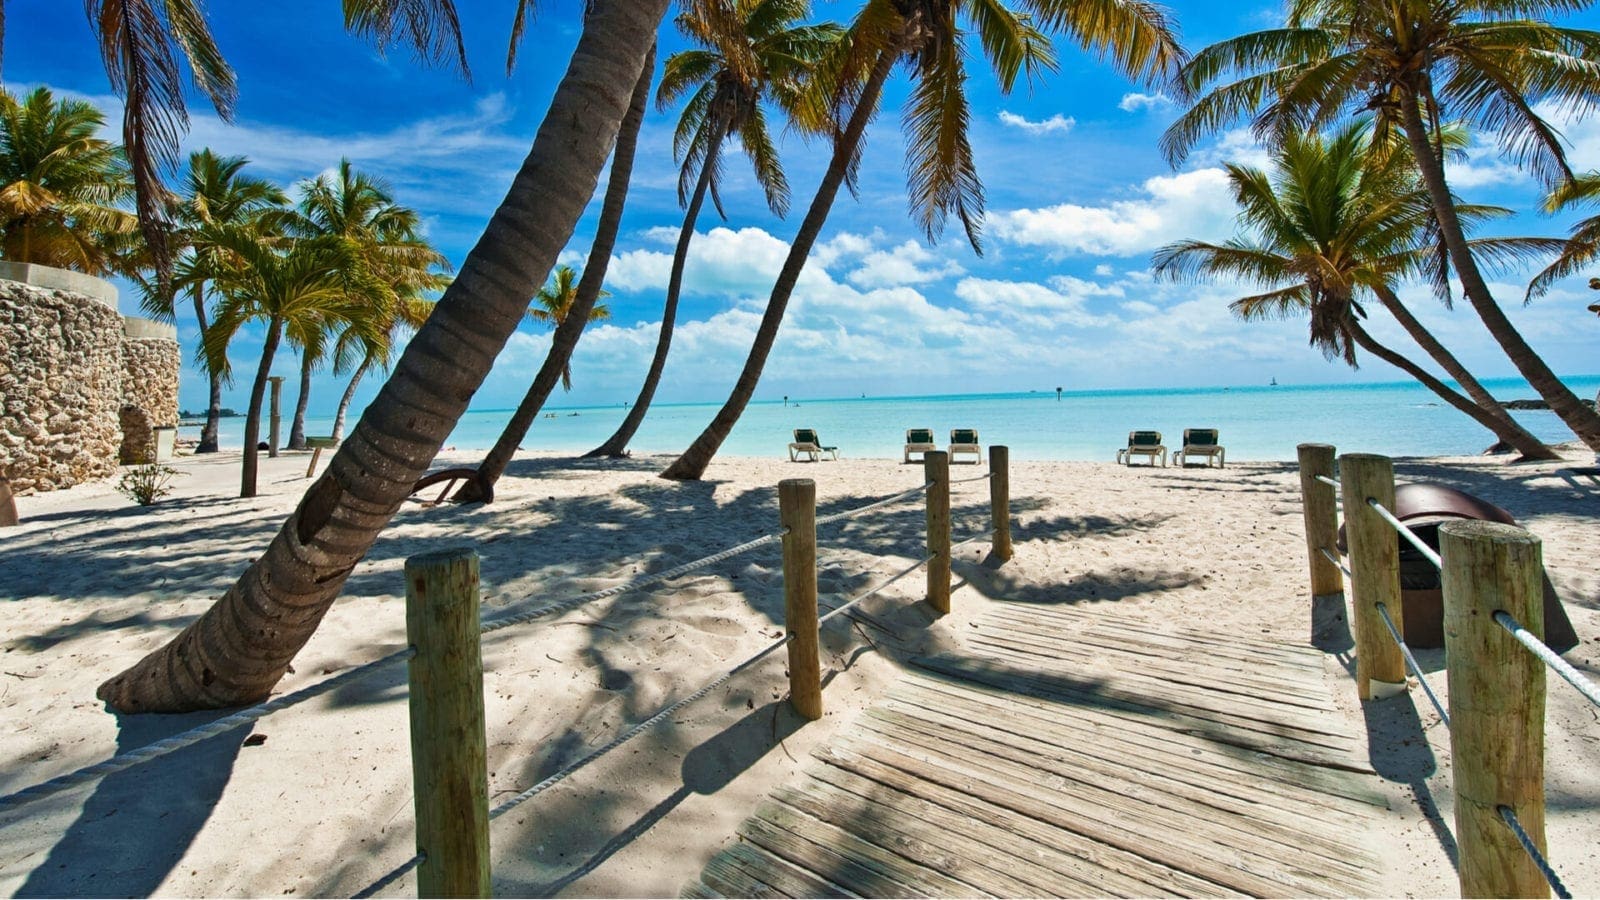 Image of a beach in Florida with palm trees and a blue ocean